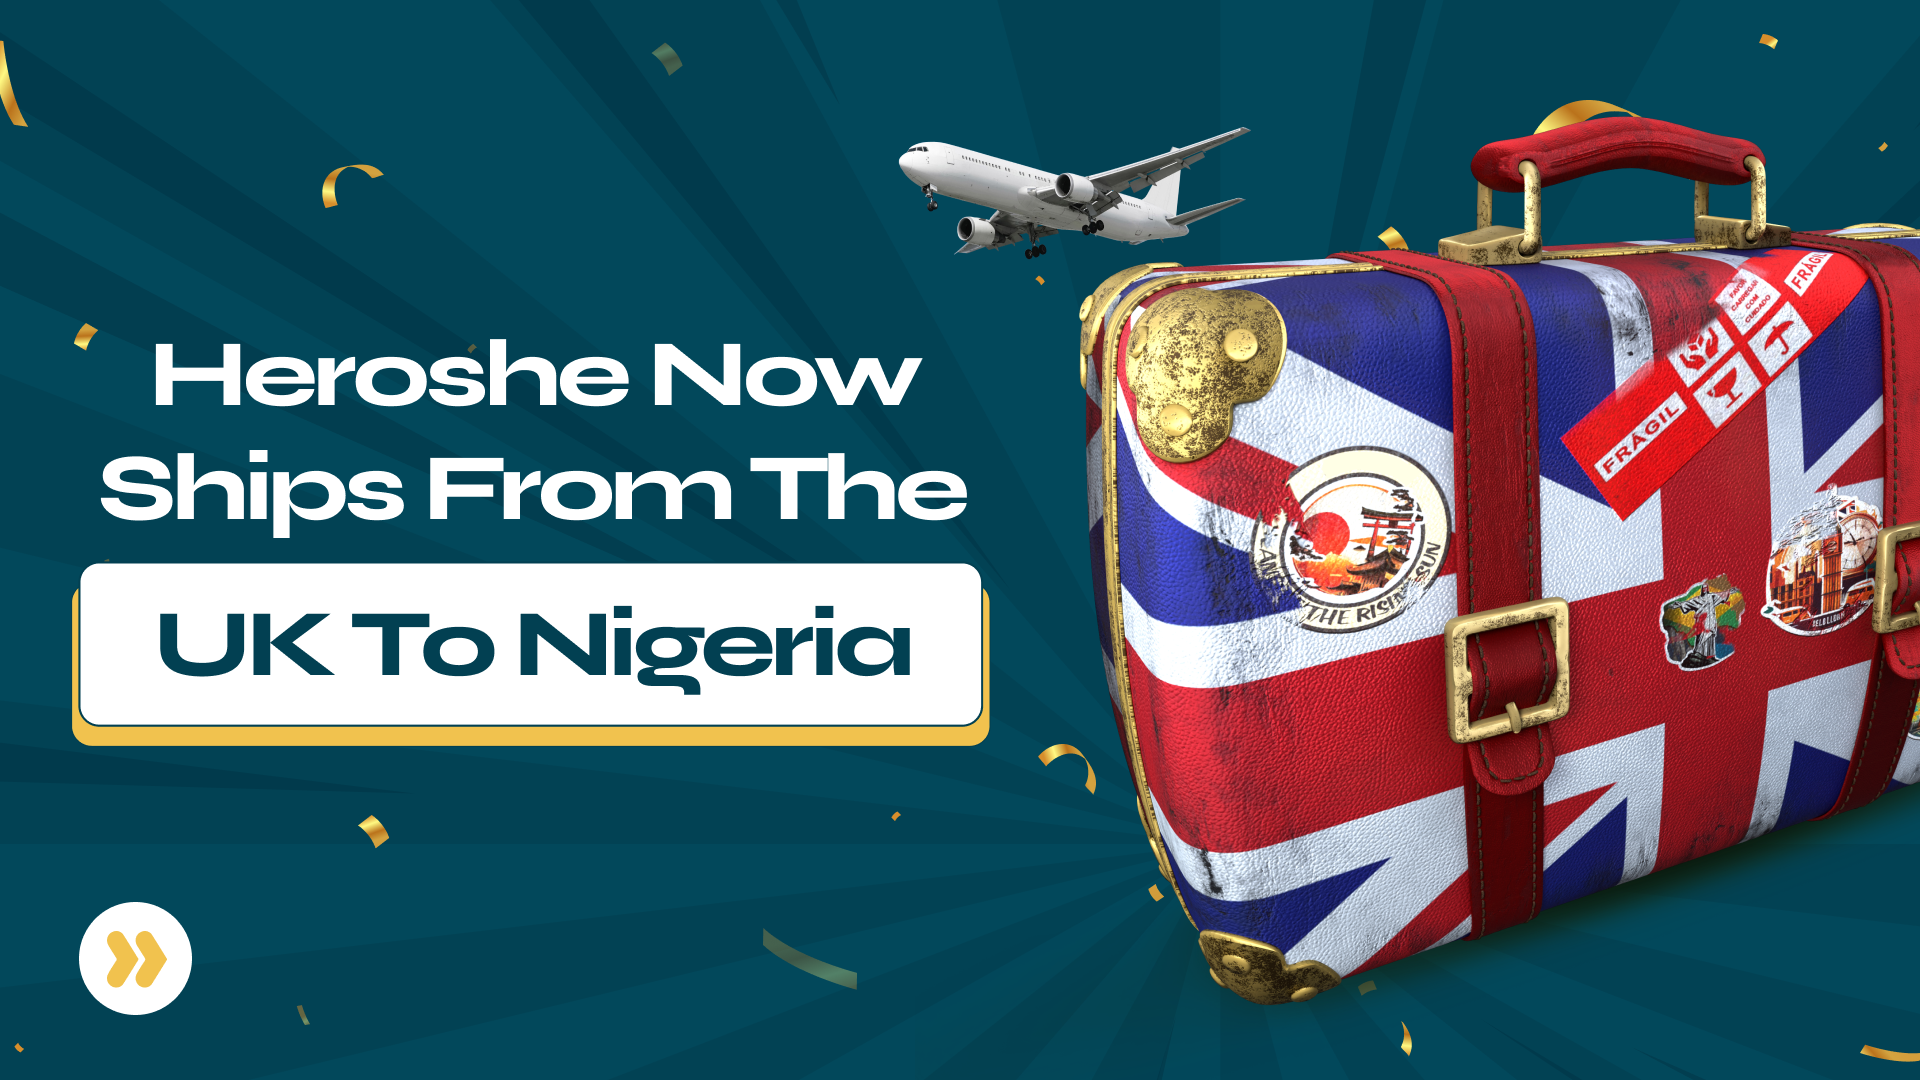 Exciting News!!! Heroshe Now Ships From The UK To Nigeria!